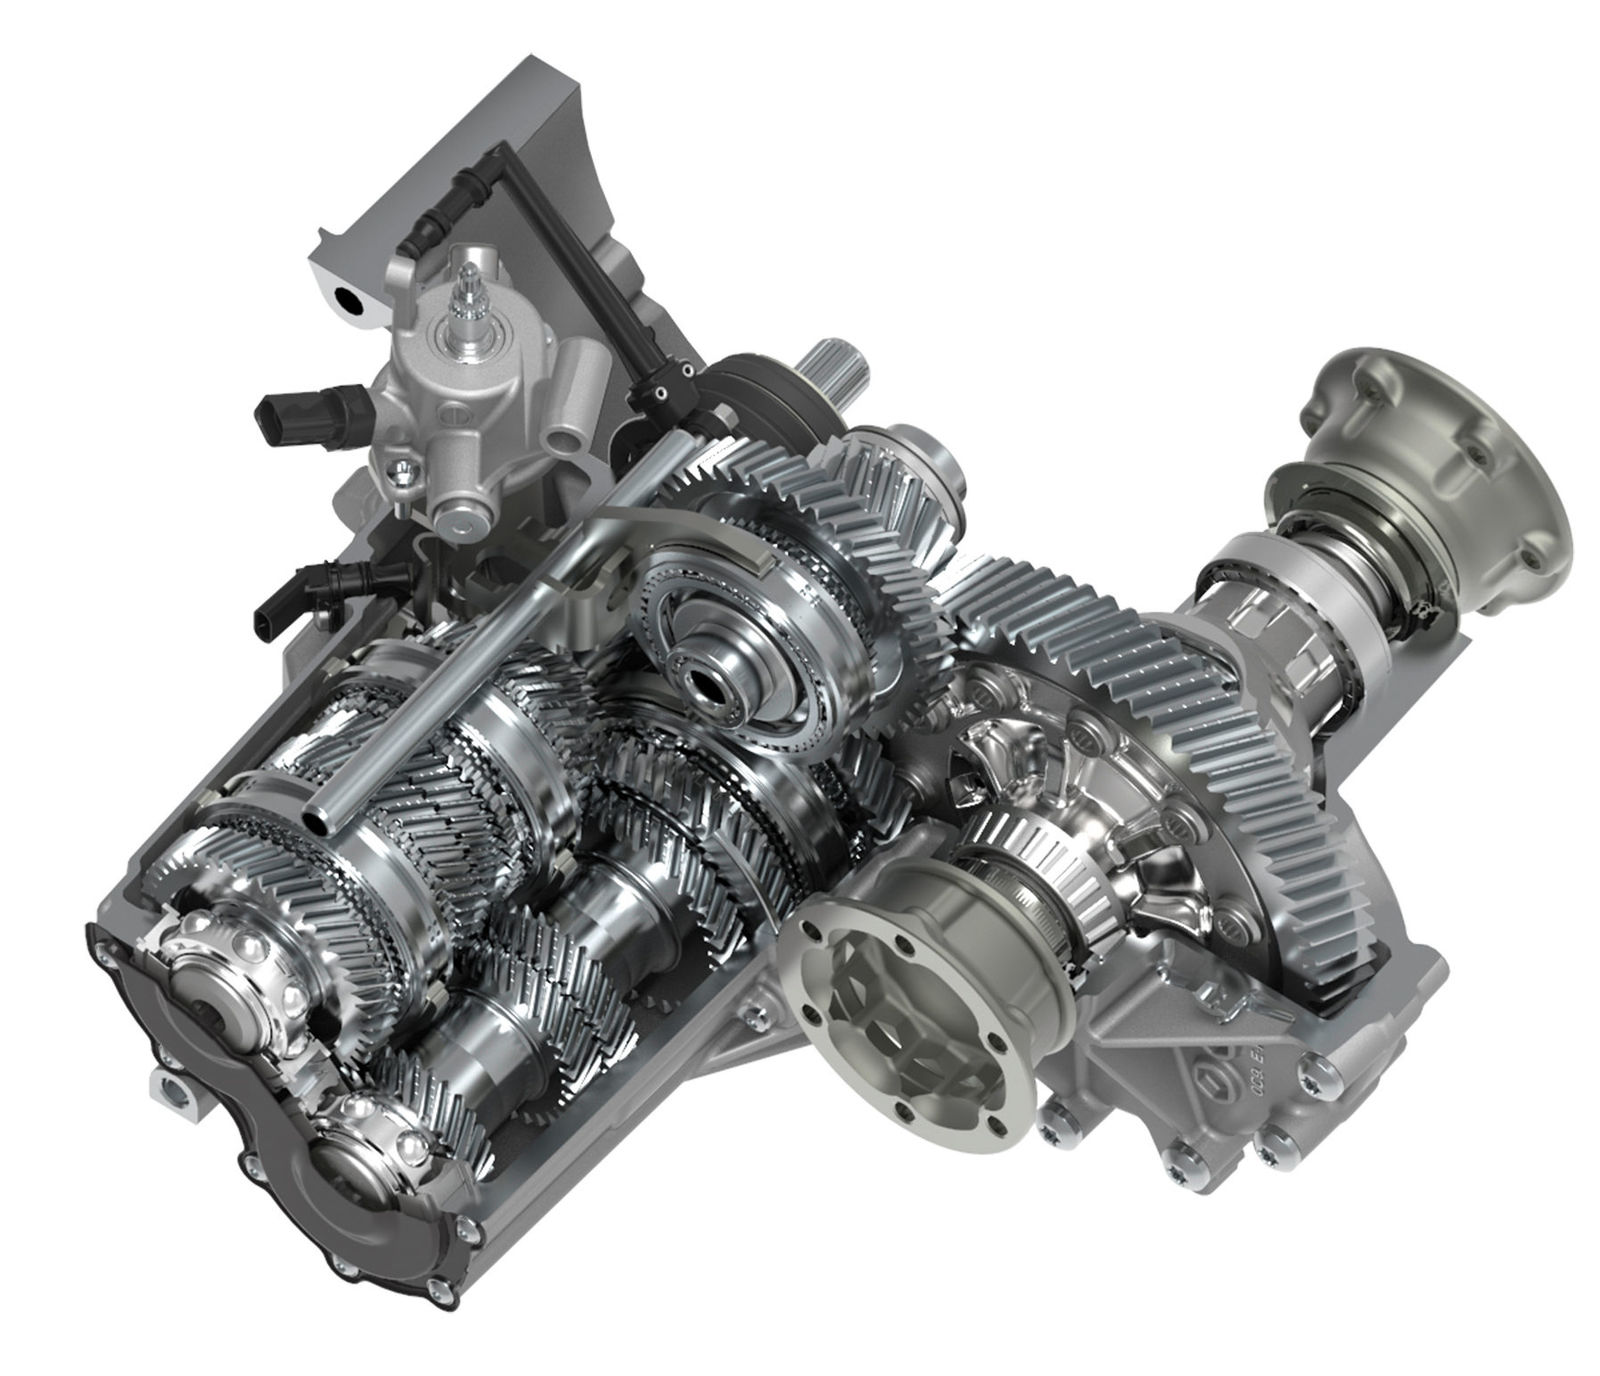 New gearbox generation enables CO2 savings of up to five grammes per kilometre